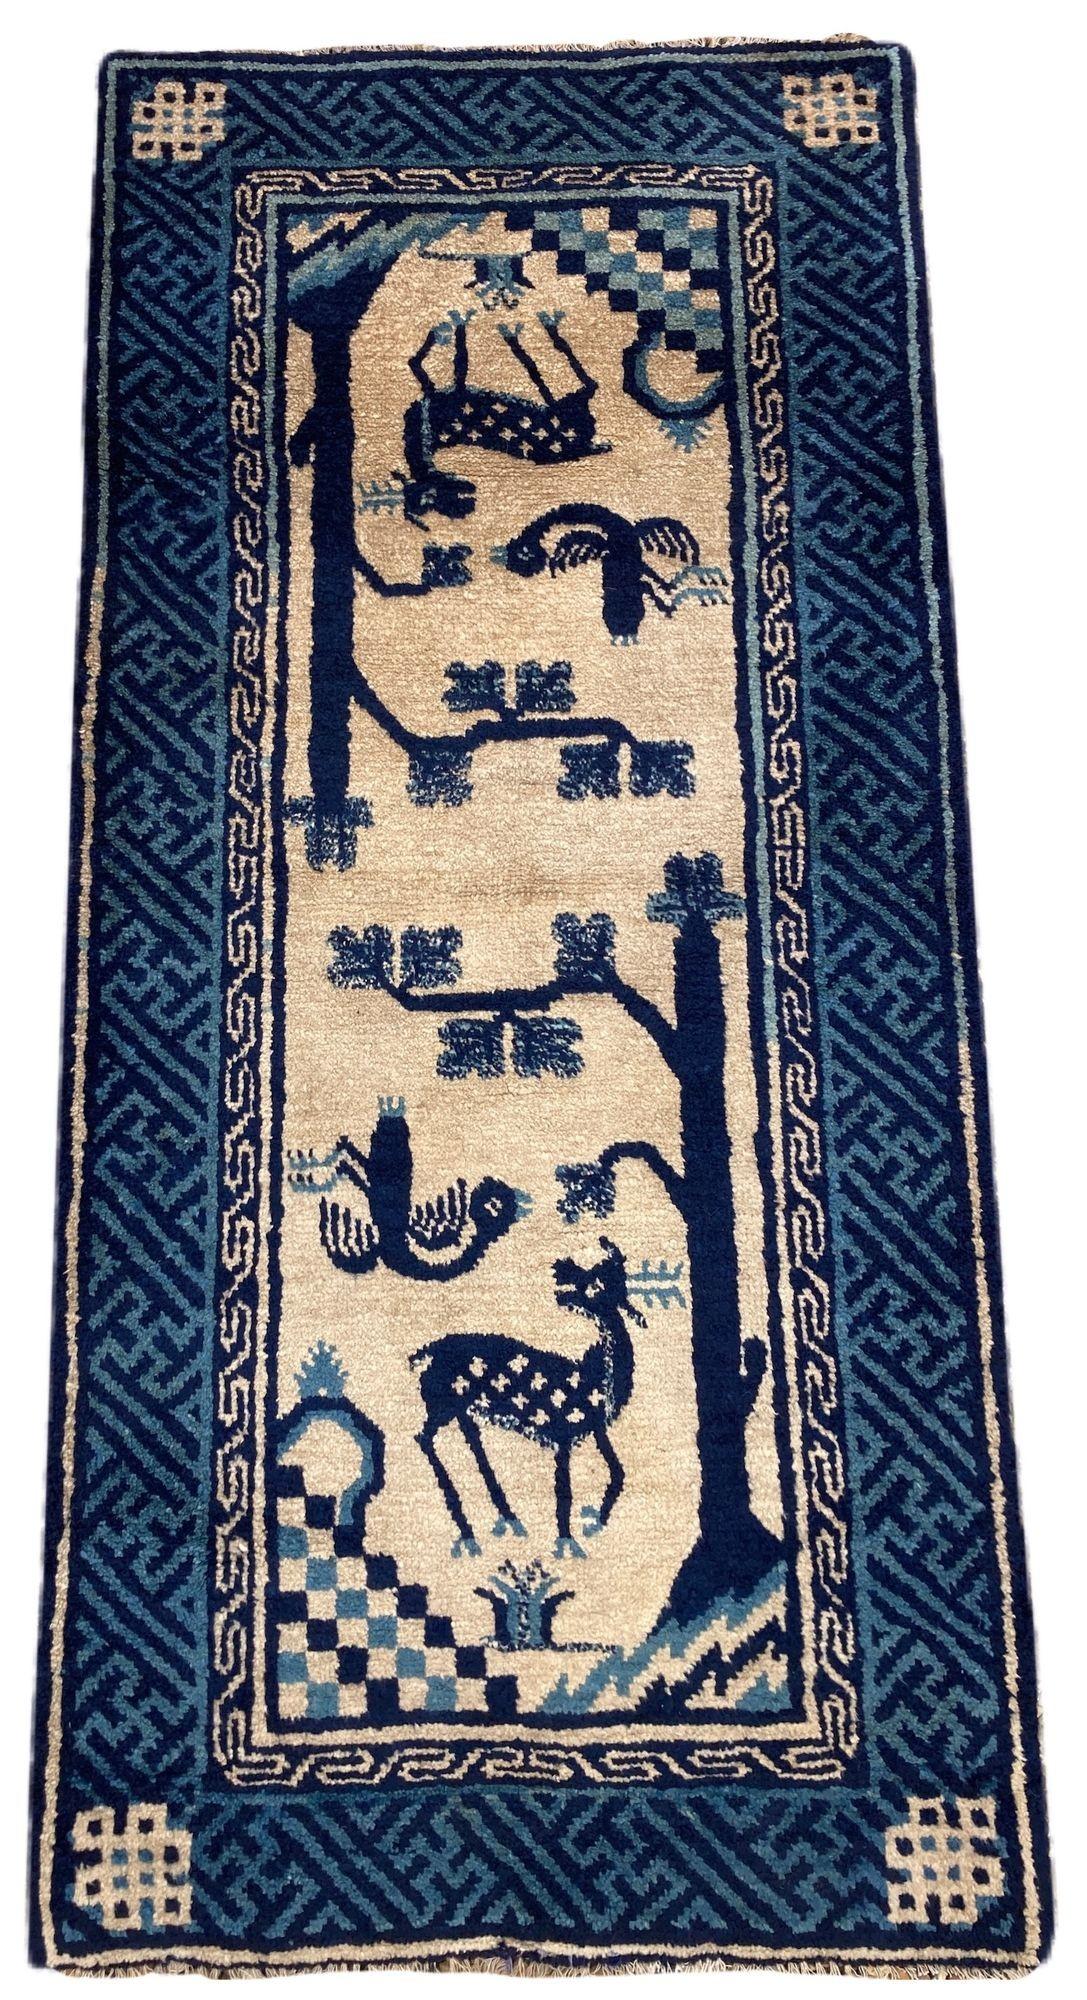 A lovely vintage Pao-Tao rug, handwoven in China circa 1940 with the traditional design of the deer and the crane on an ivory field and dark indigo key border.
Size: 1.20m x 0.58m (3ft 11in x 1ft 10in)
This rug is in good condition with light age